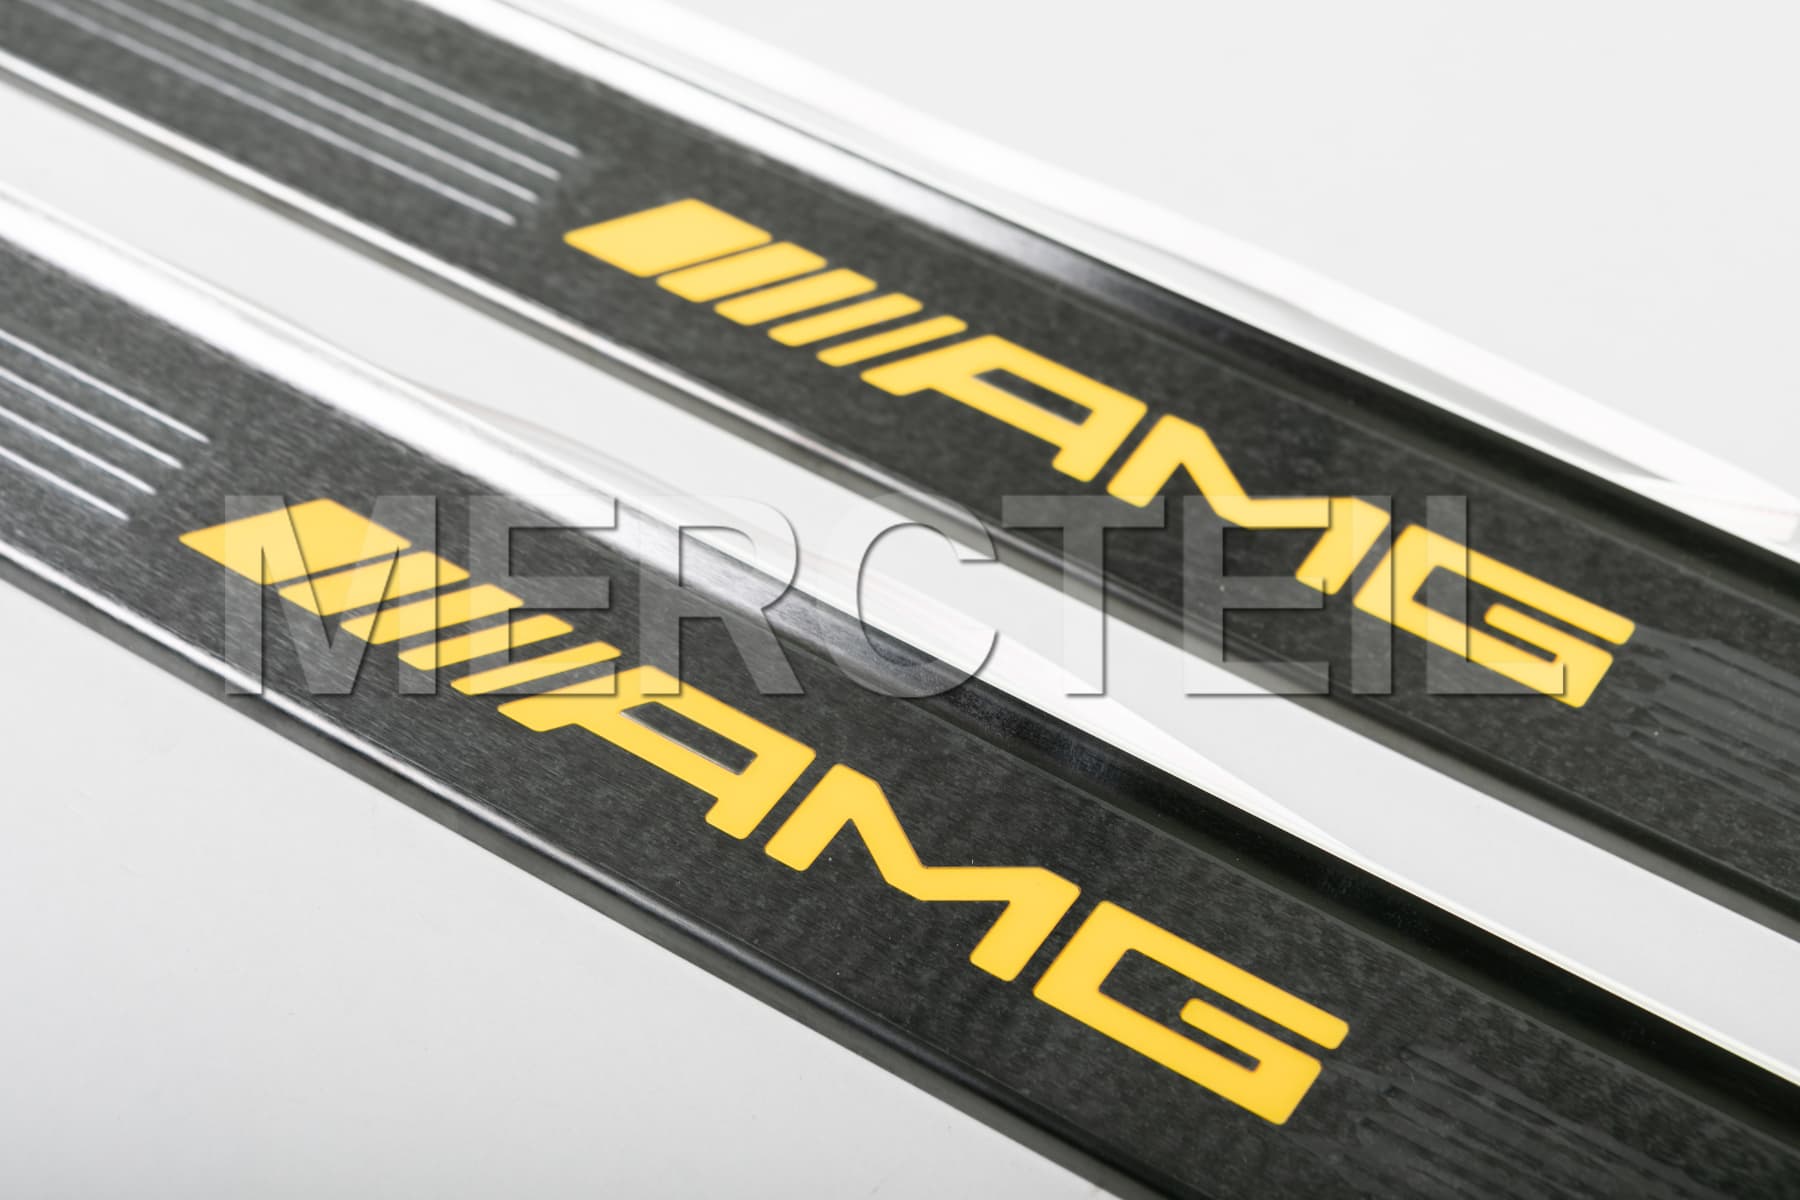 AMG Coupe C Class / E Class Special AMG Final Edition Illuminated LED Door Sill Covers A/C205 A/C238 Genuine Mercedes-AMG (Part number: A2056801209)